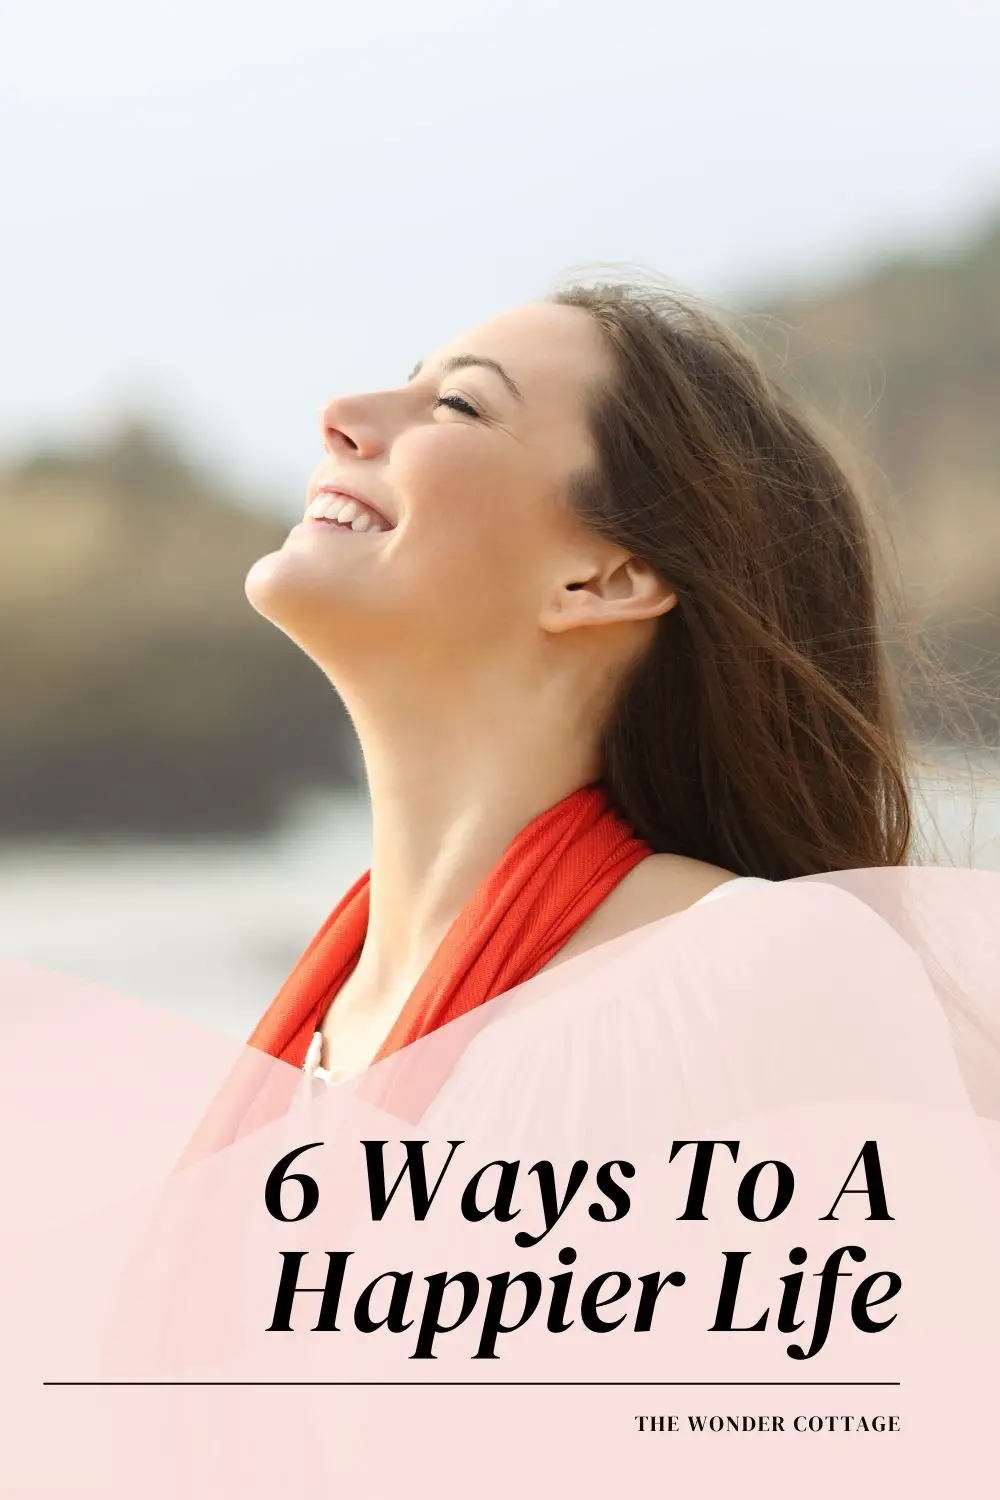 6 ways to a happier life